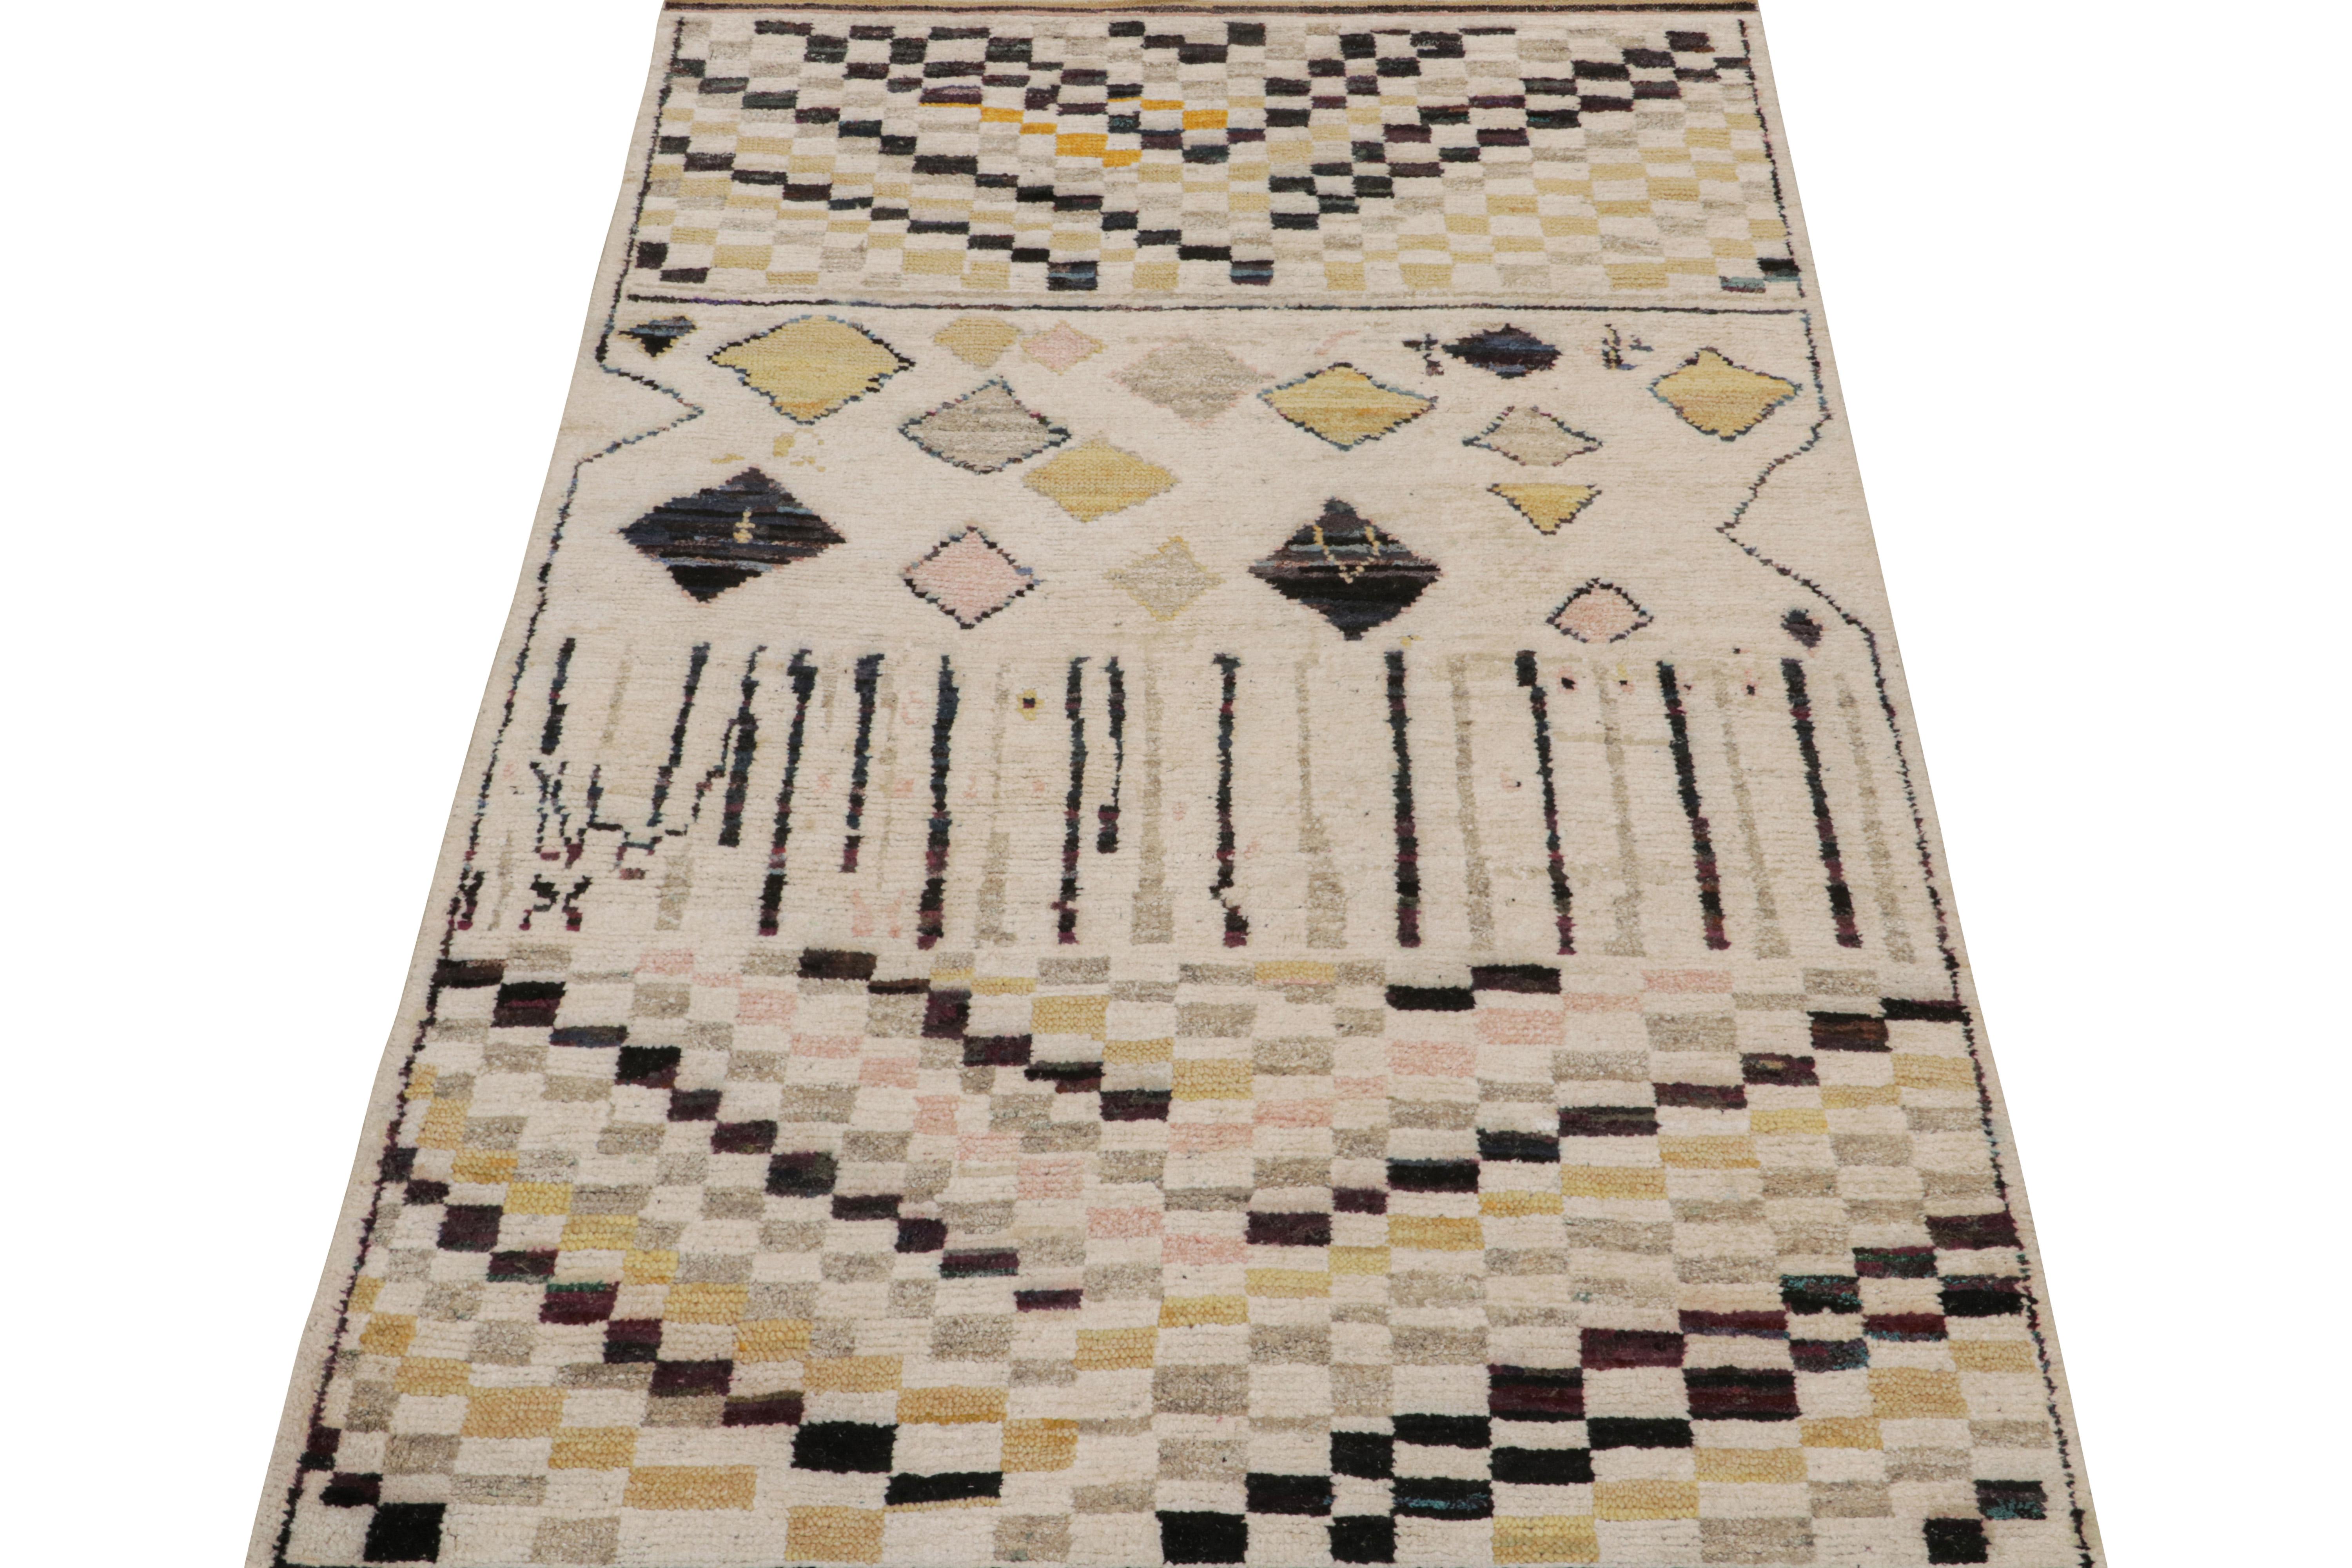 Tribal Rug & Kilim’s Moroccan Style Rug in Beige, Black and Gold Geometric Patterns For Sale